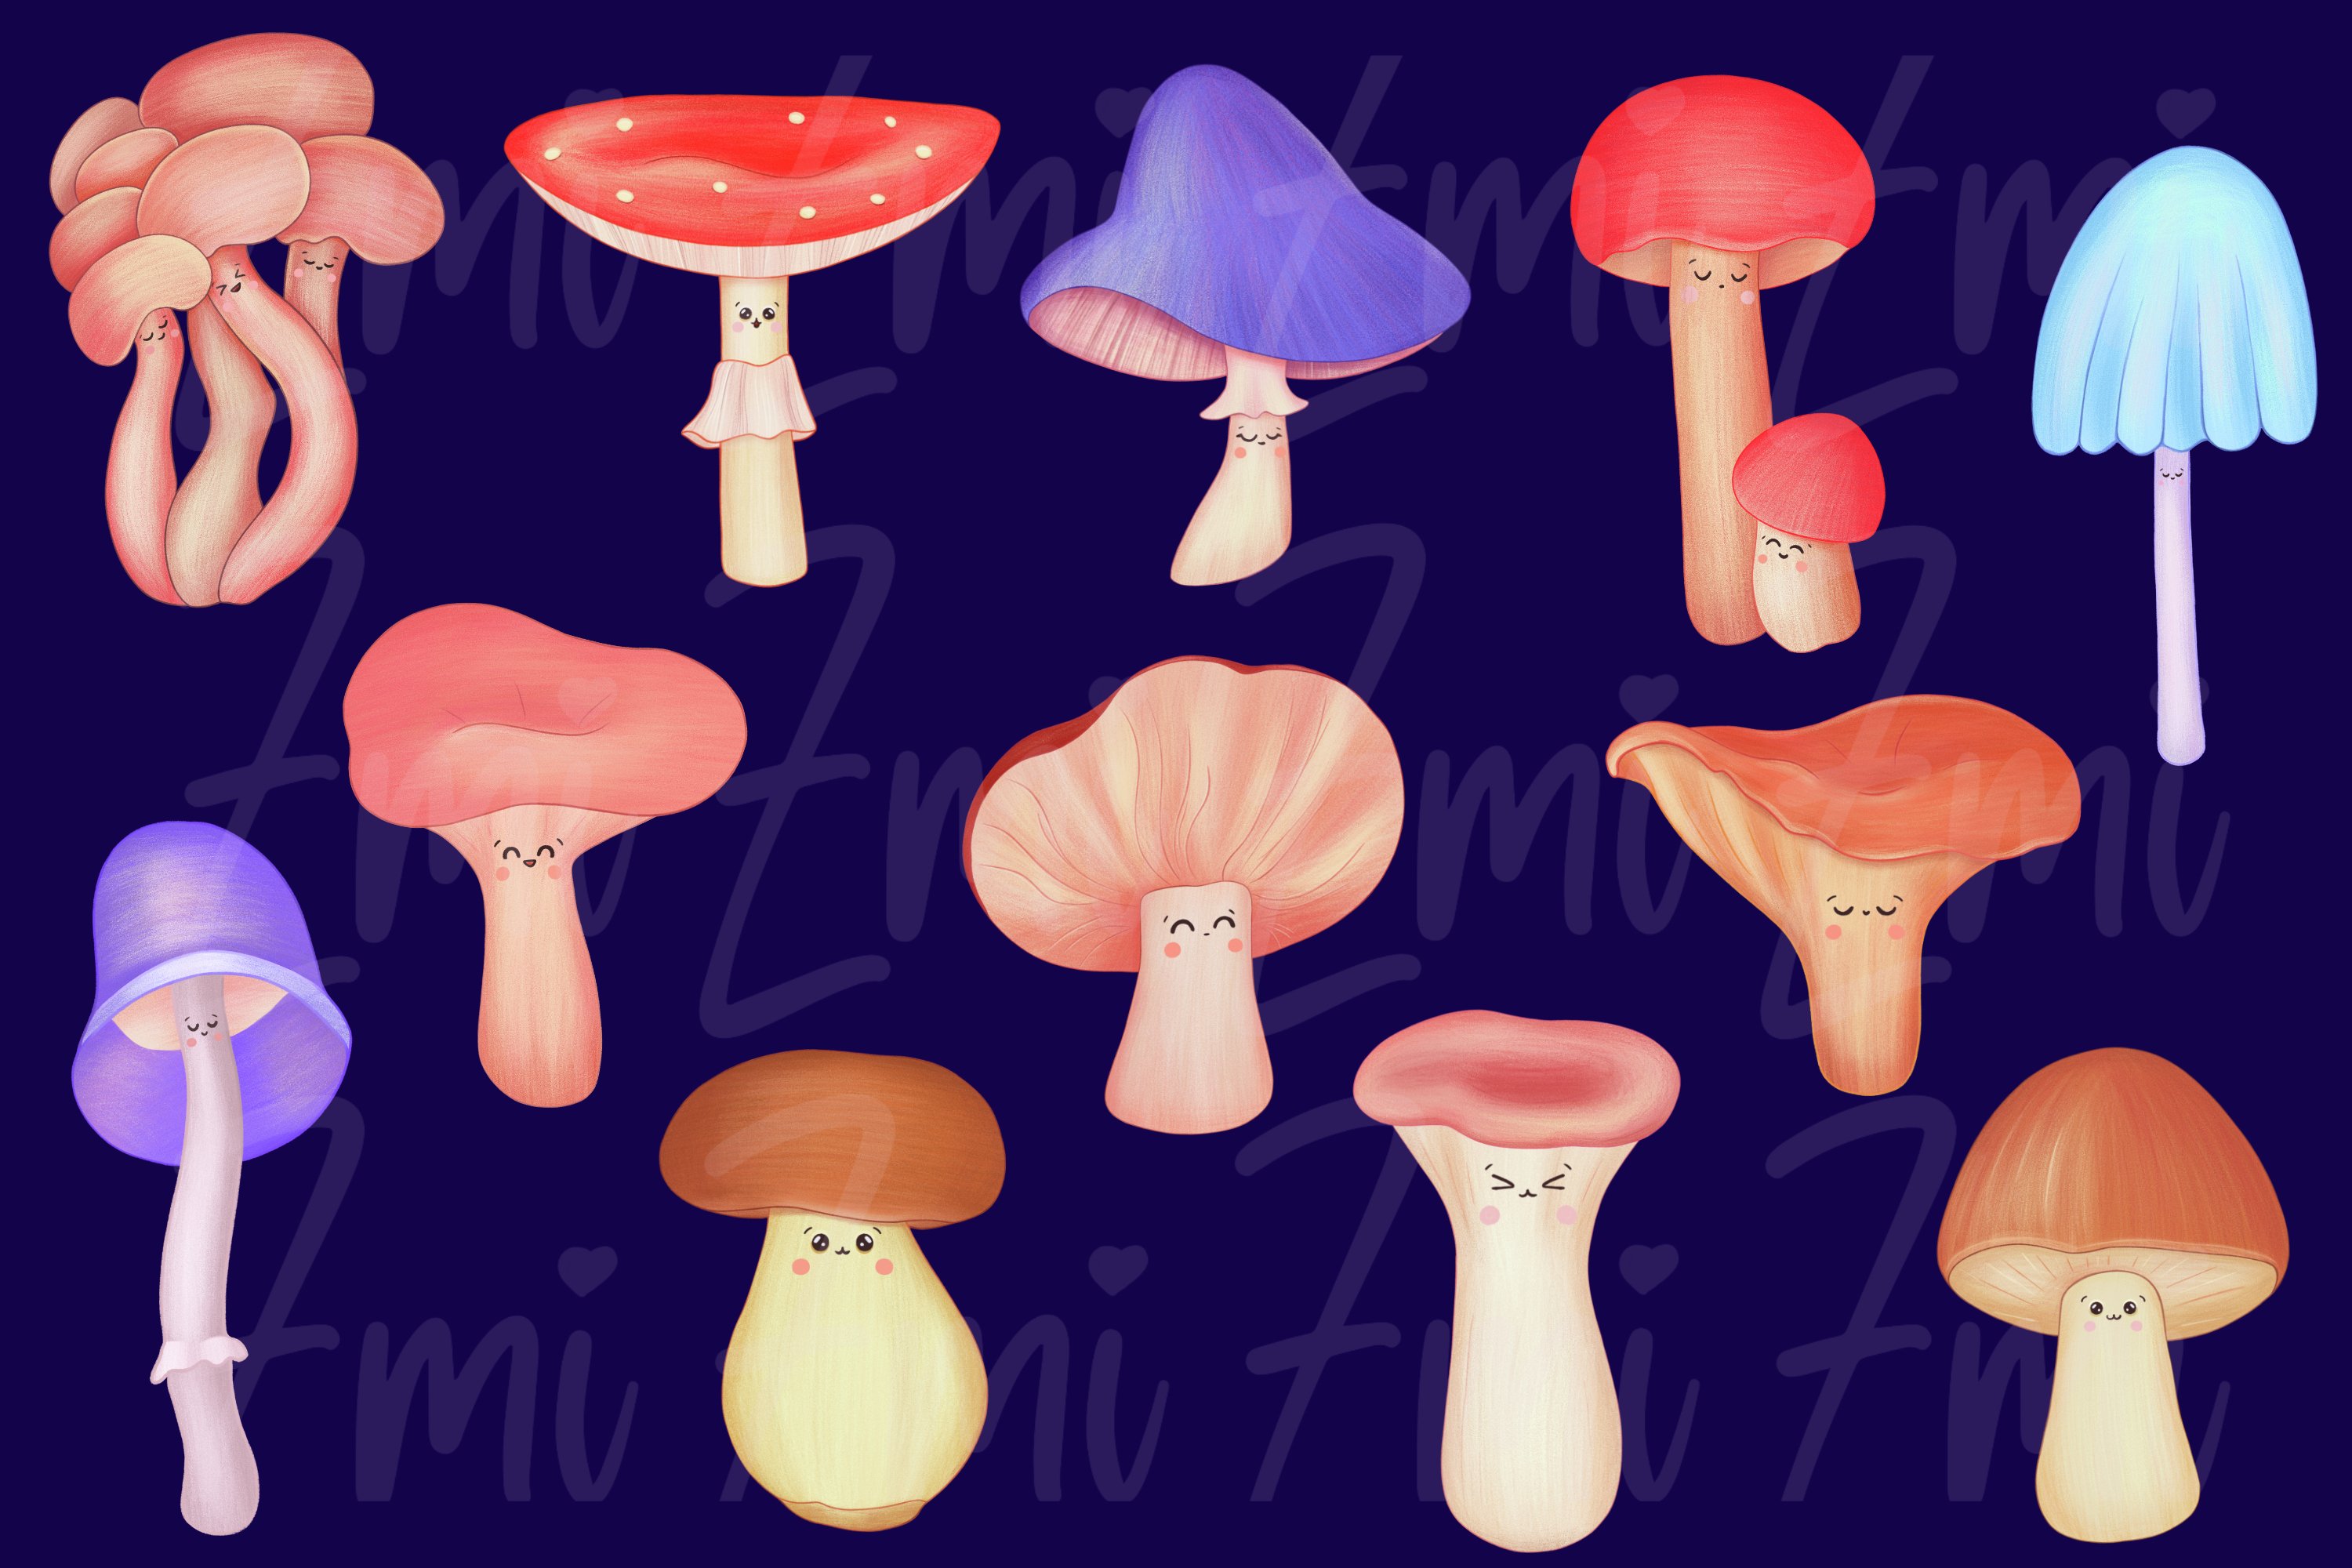 A set of different cartoon mushrooms illustrations on a blue background.